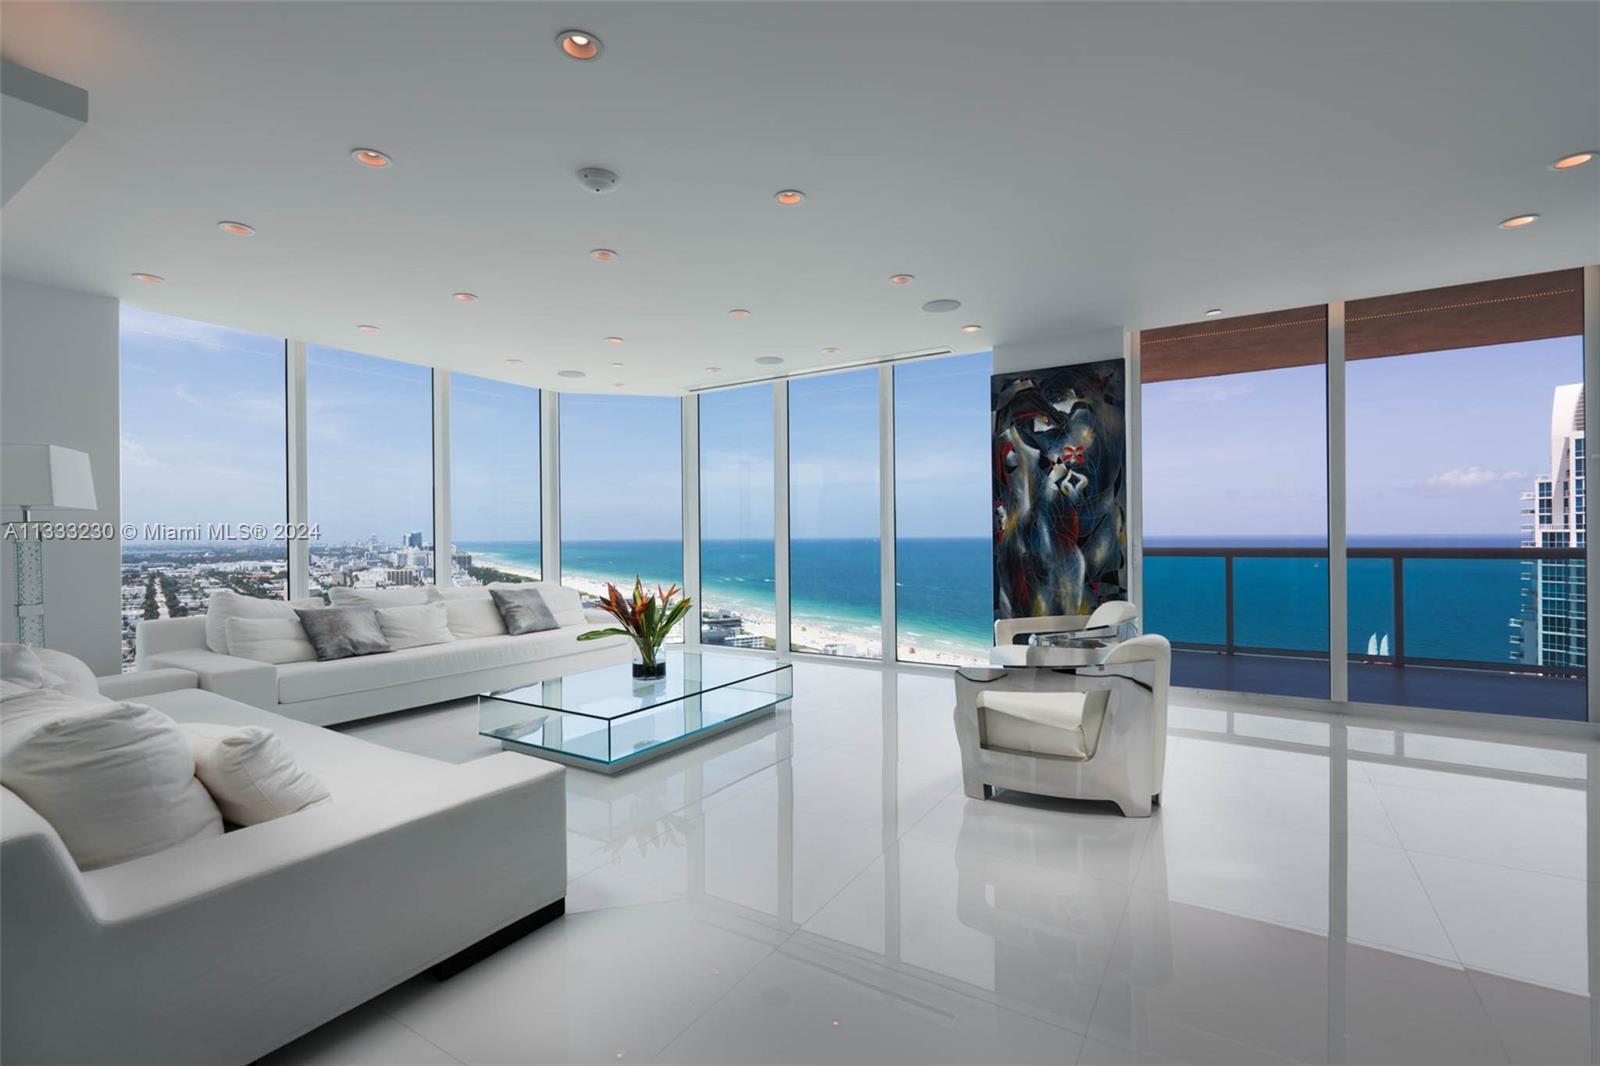 Large -Over 4700 sq ft.  Rare (double) apartment with breathtaking panoramic views of beach, ocean, bay, Miami skyline and cruise ships, South Pointe Park.    Dual elevators open into private art gallery entrance.  Perfect for large family or entertaining guests.  2 large primary bedroom suites. (4BR).  storage plentiful. Renovated 2013. Enjoy South of Fifth lifestyle at its finest!